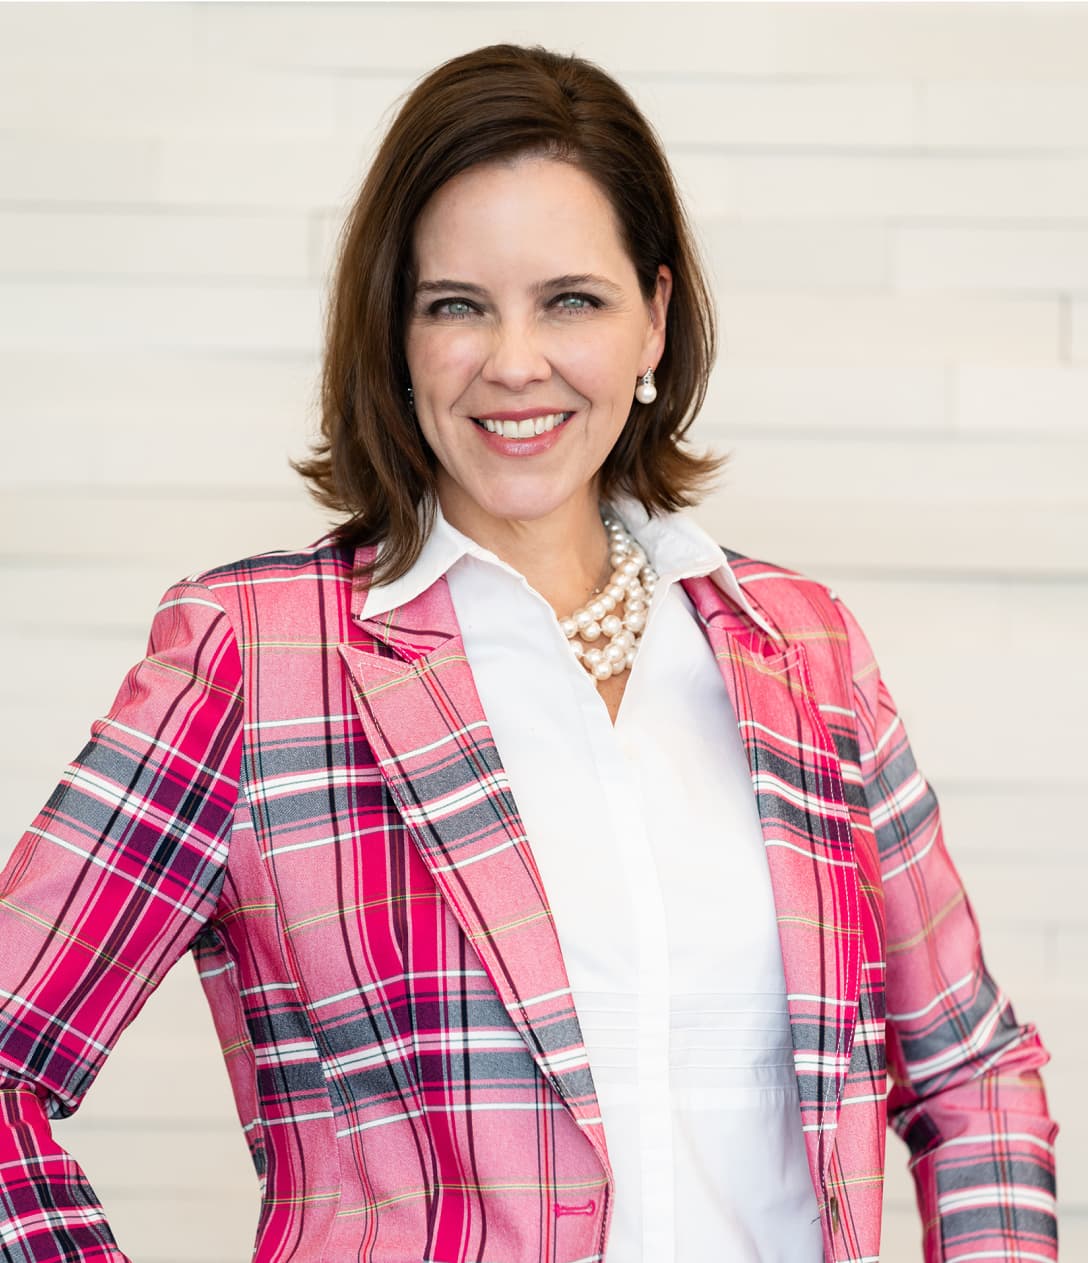 Dr. Kirby stands smiling wearing a plaid pink blazer standing outside the state-of-the-art plastic surgery center located at Kirby Plastic Surgery in Fort Worth.